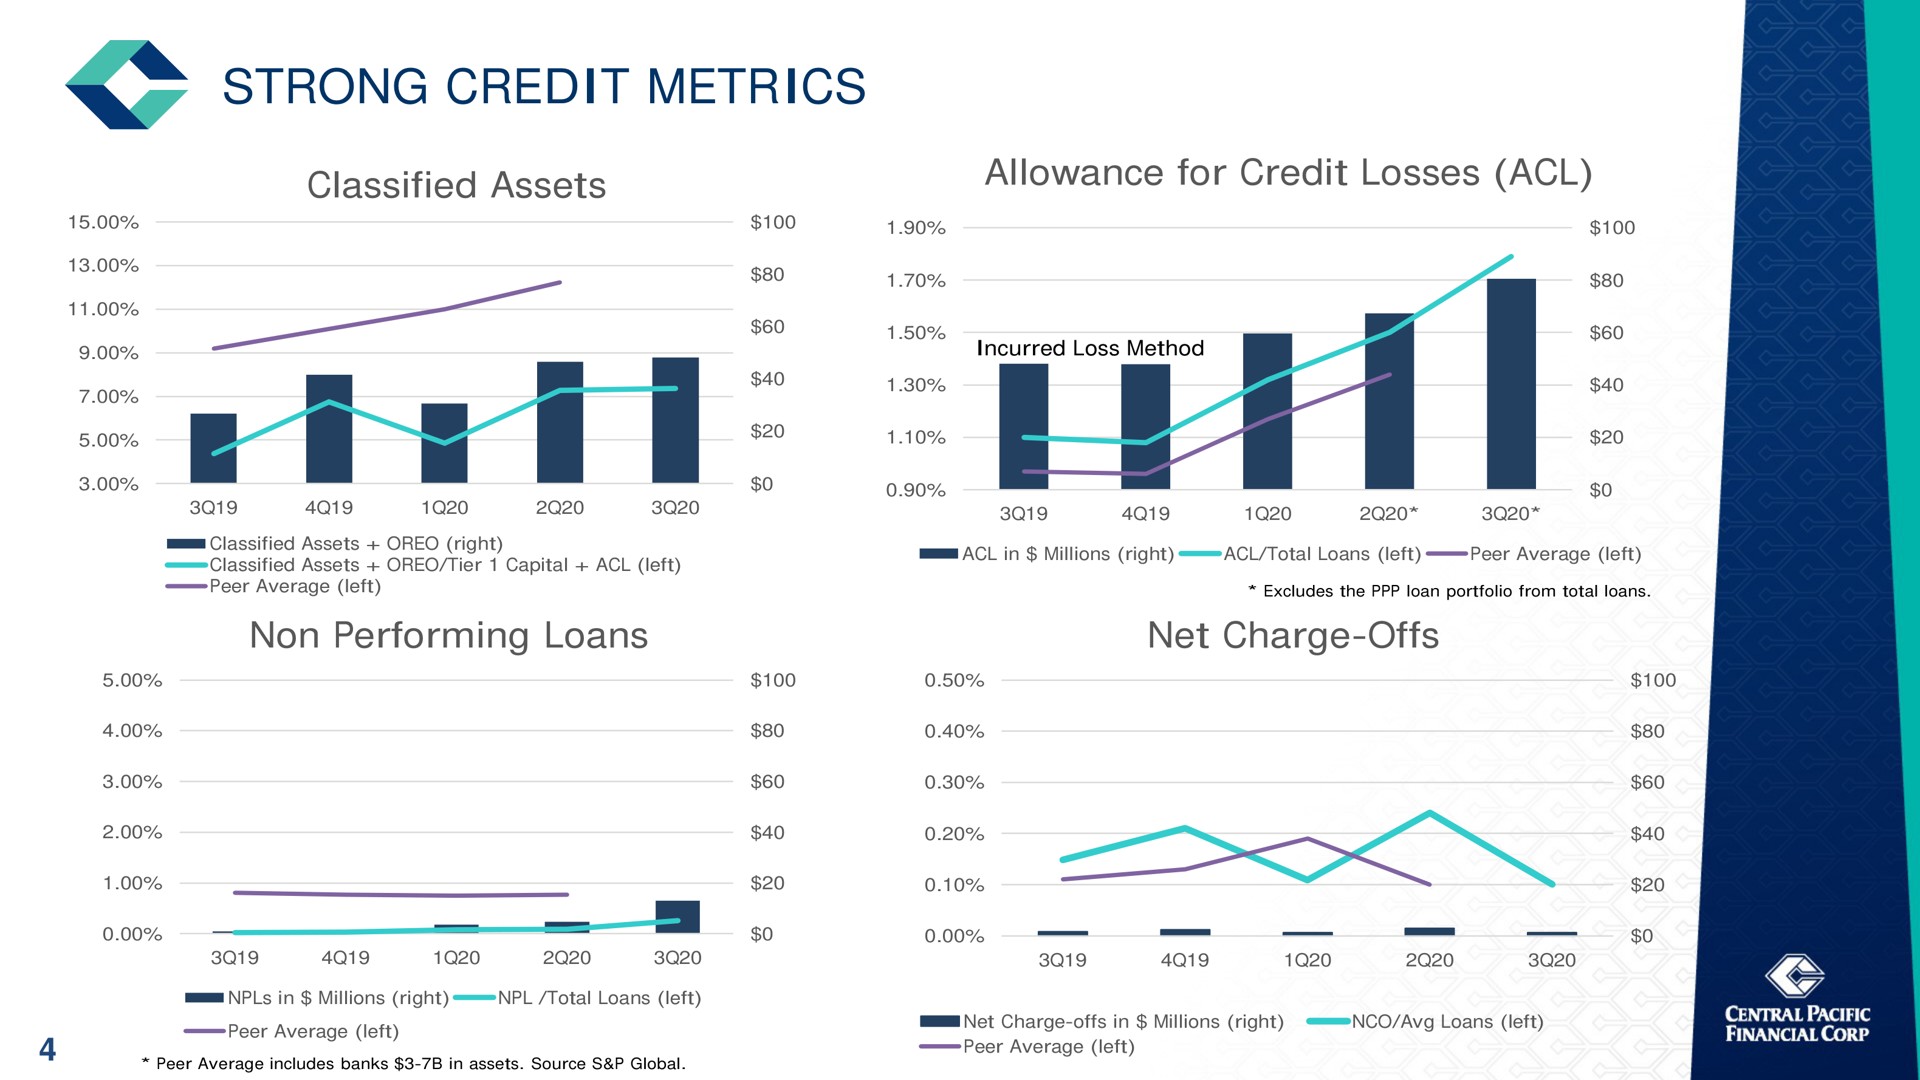 strong credit metrics classified assets allowance for credit losses non performing loans net charge offs | Central Pacific Financial